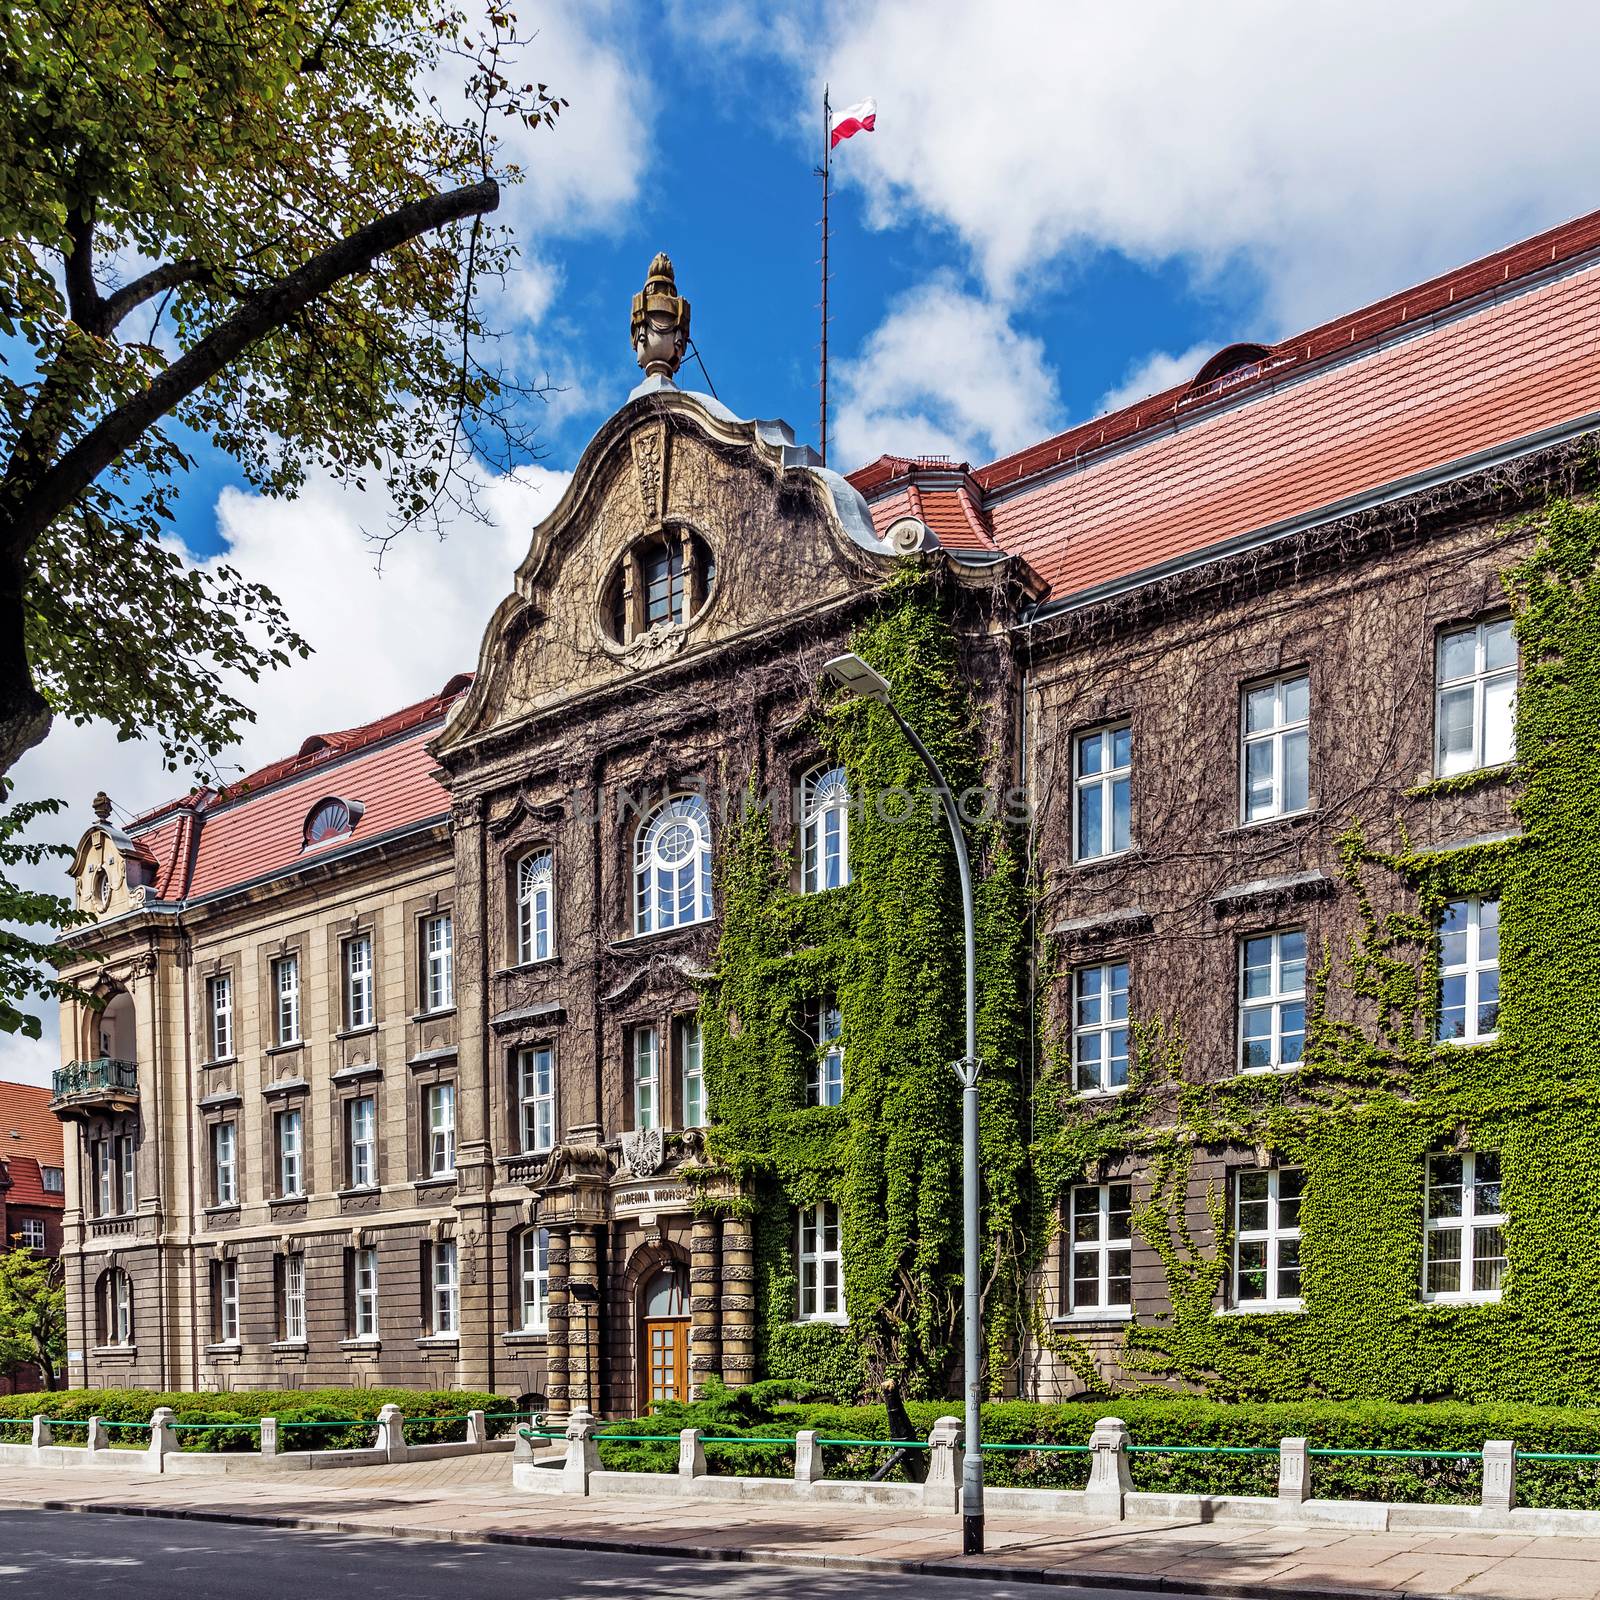 Maritime University of Szczecin, state technical university founded in 1947, with over 100 laboratories is one of the best-equipped maritime universities in the world